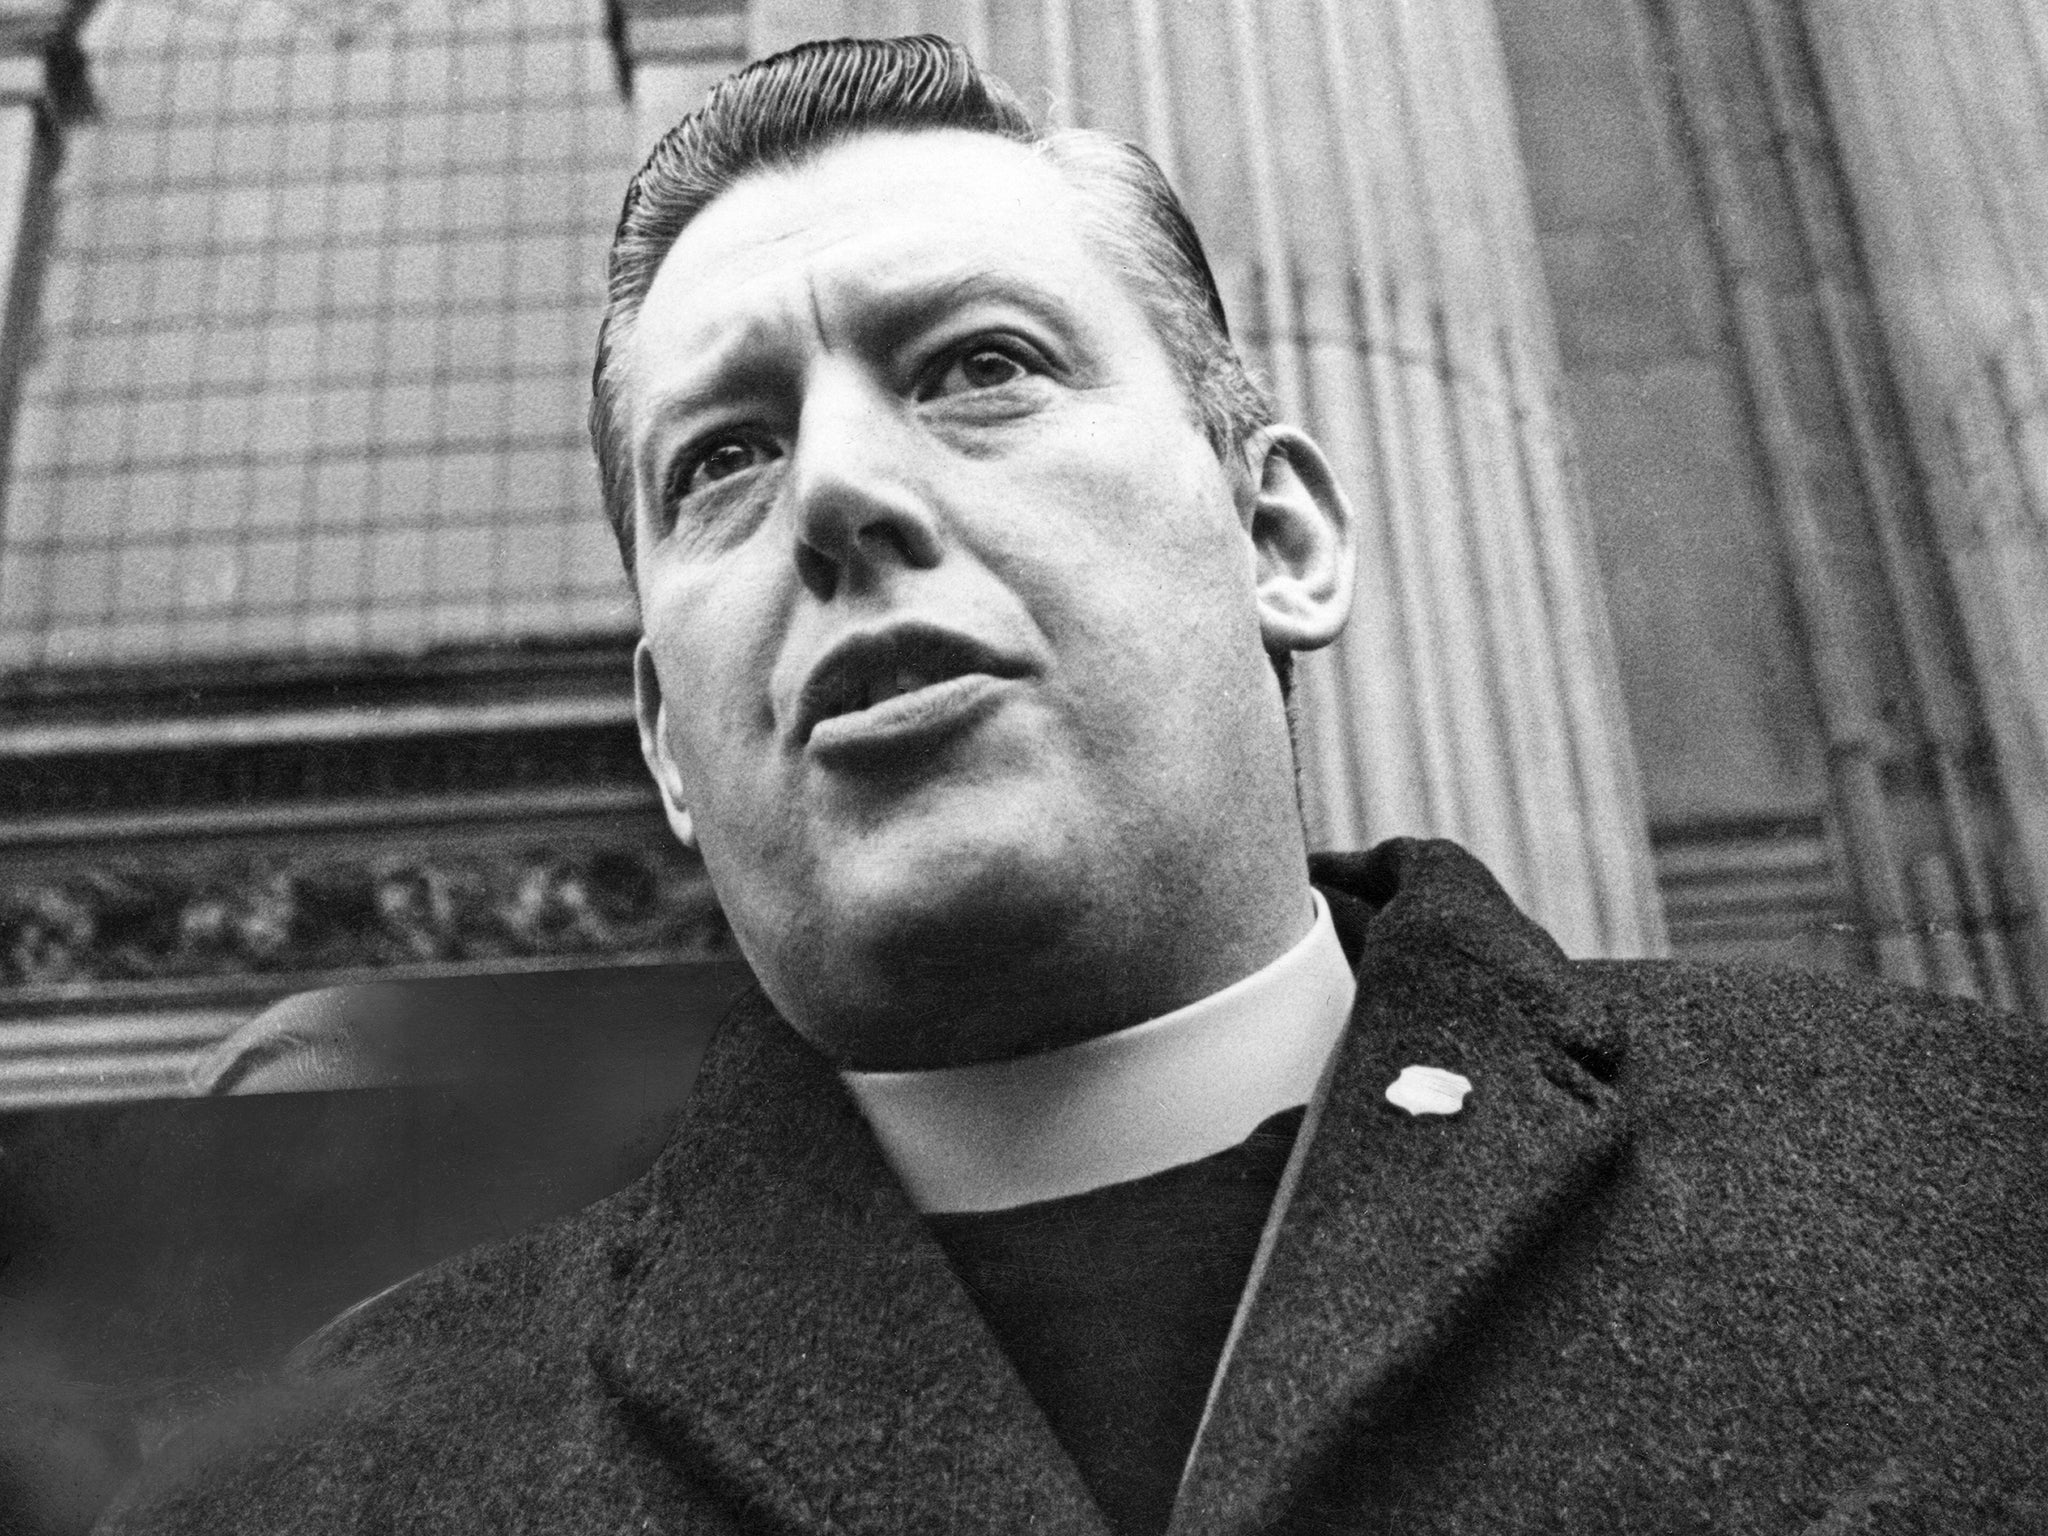 Ian Paisley protesting outside St Paul's Cathedral in 1969